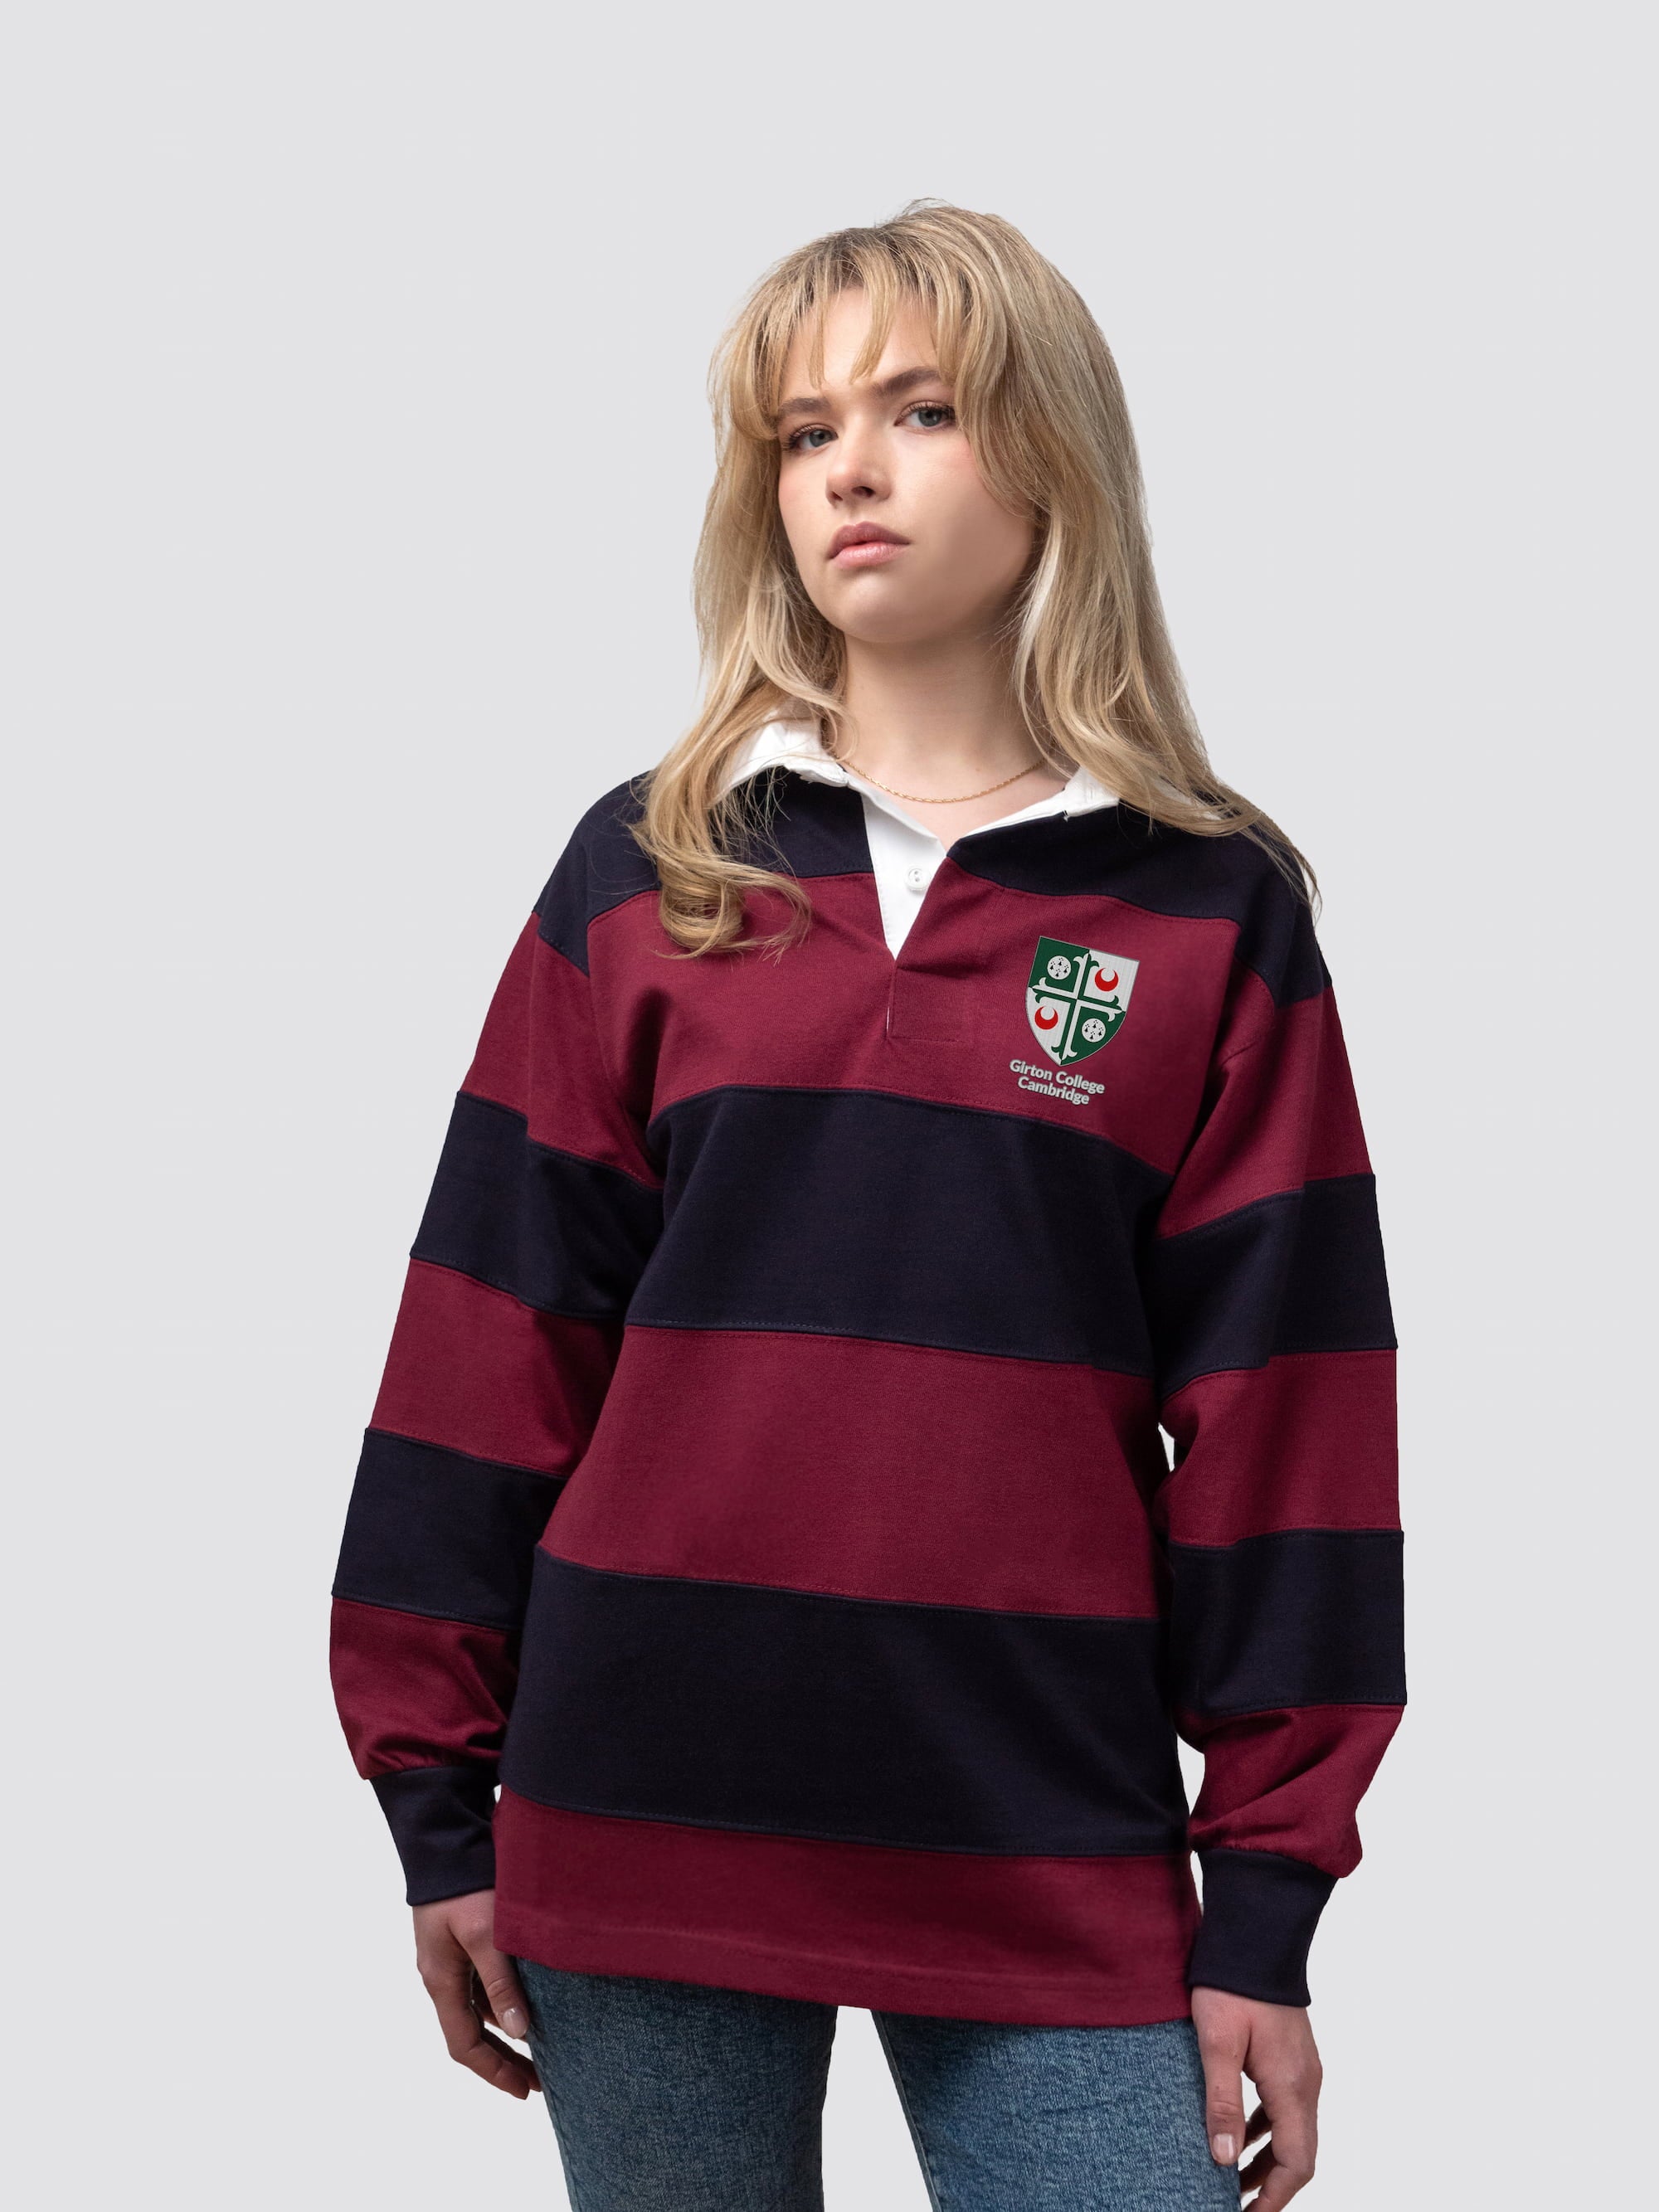 Girton College rugby shirt, with burgundy and navy stripes